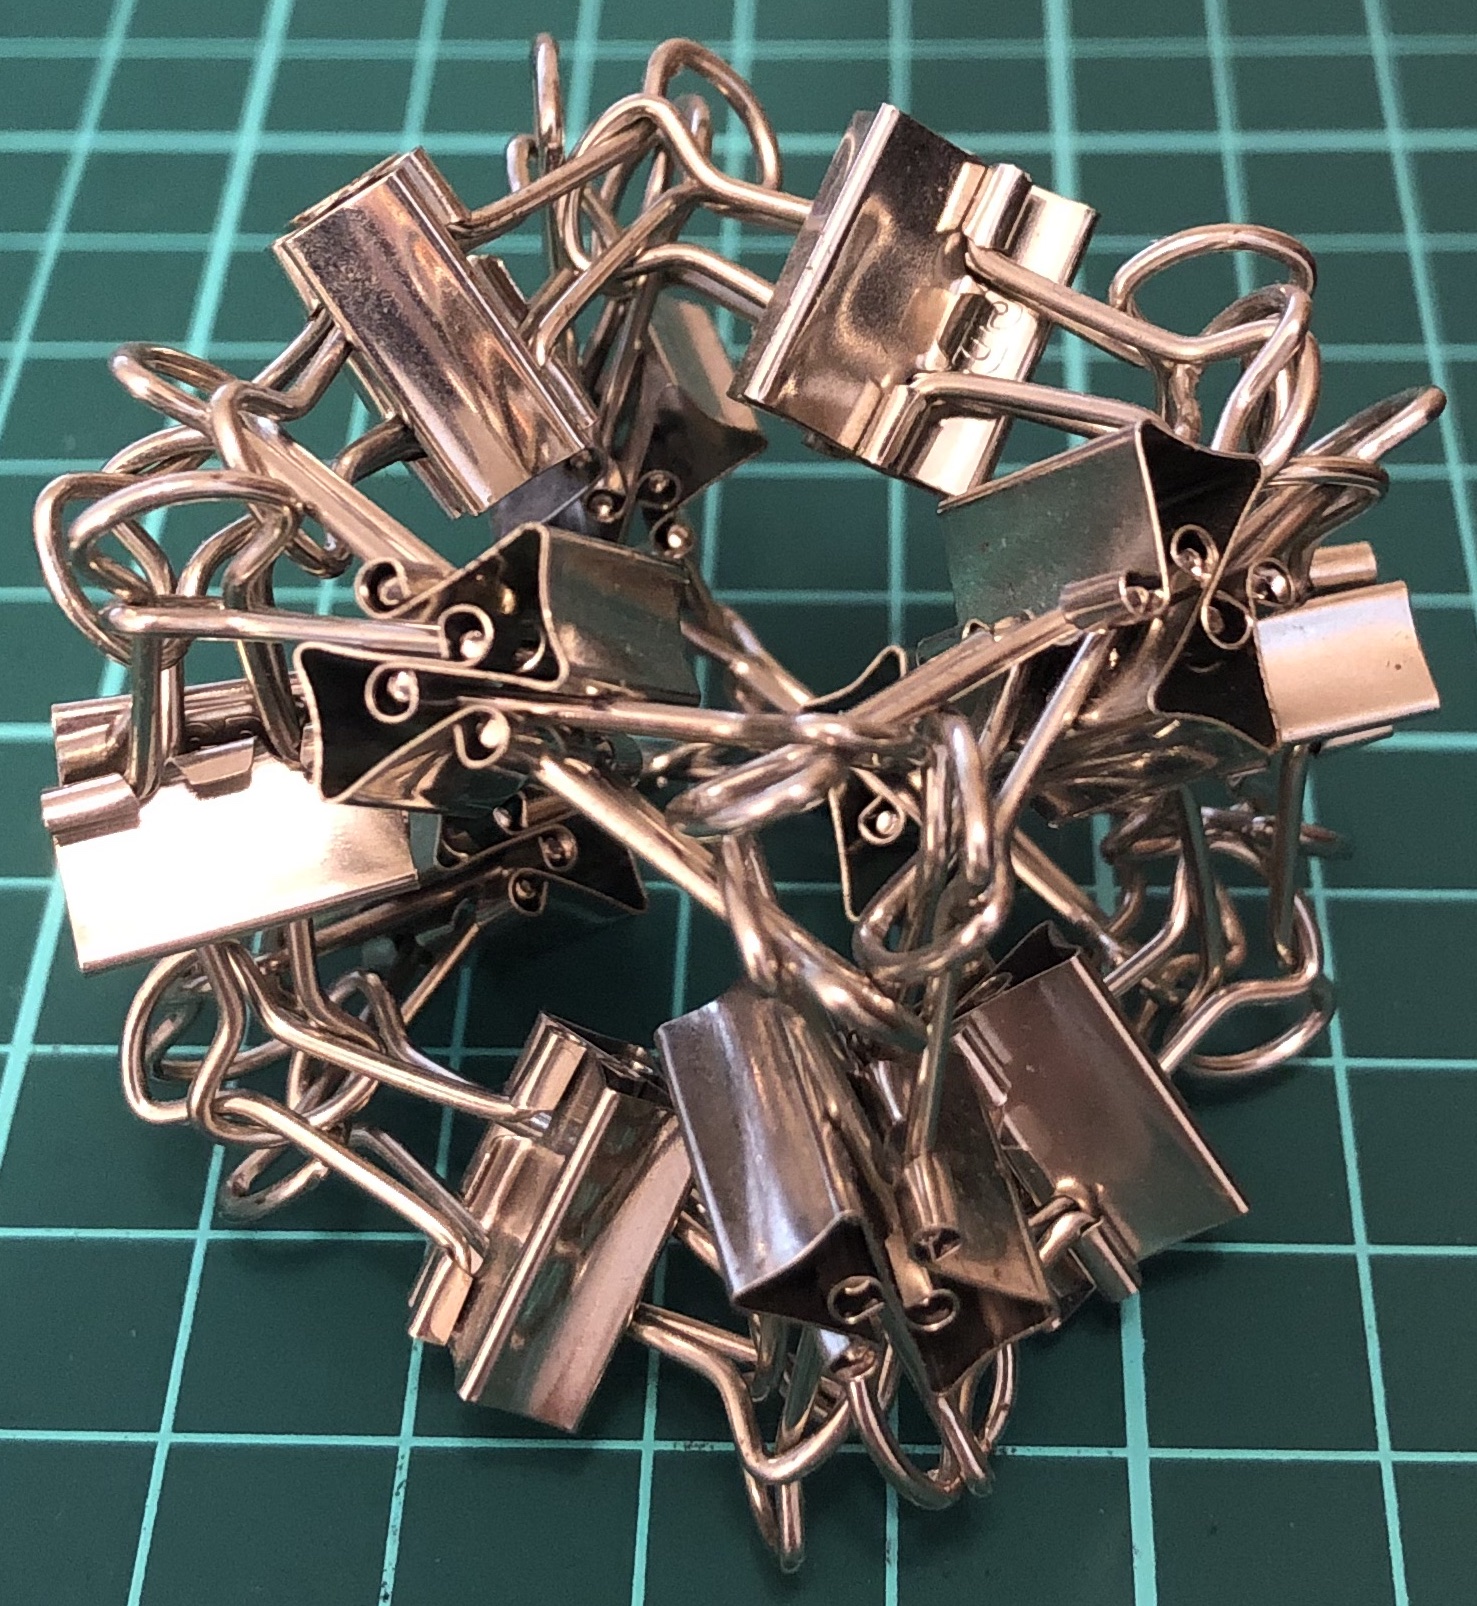 24 clips forming 12 I-edges forming cube